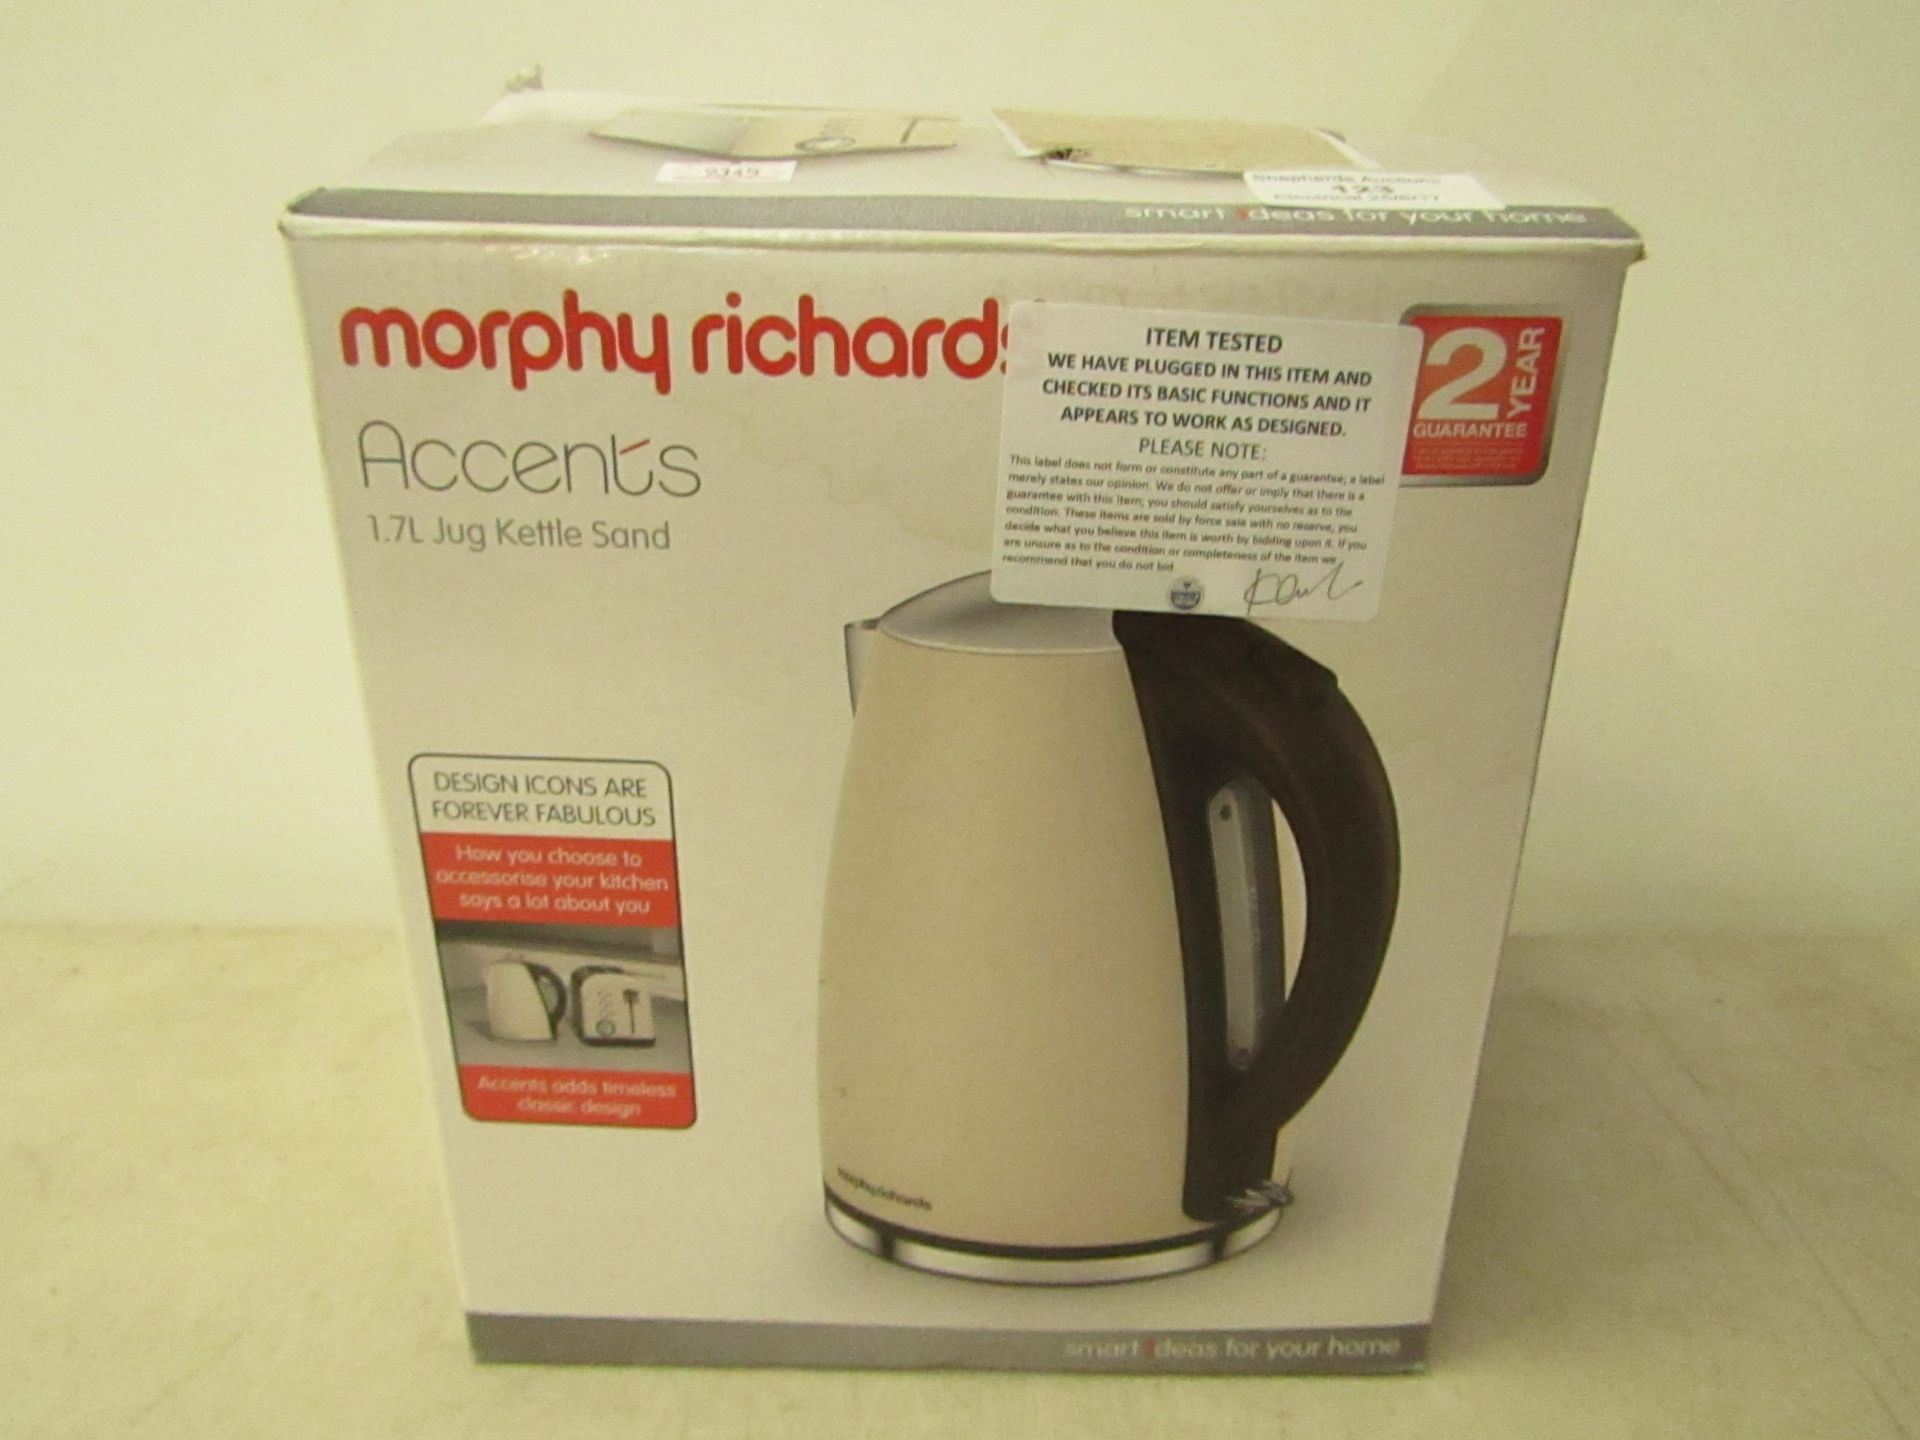 Morphy Richards Accents 1.7L jug kettle, sand, tested working and boxed.